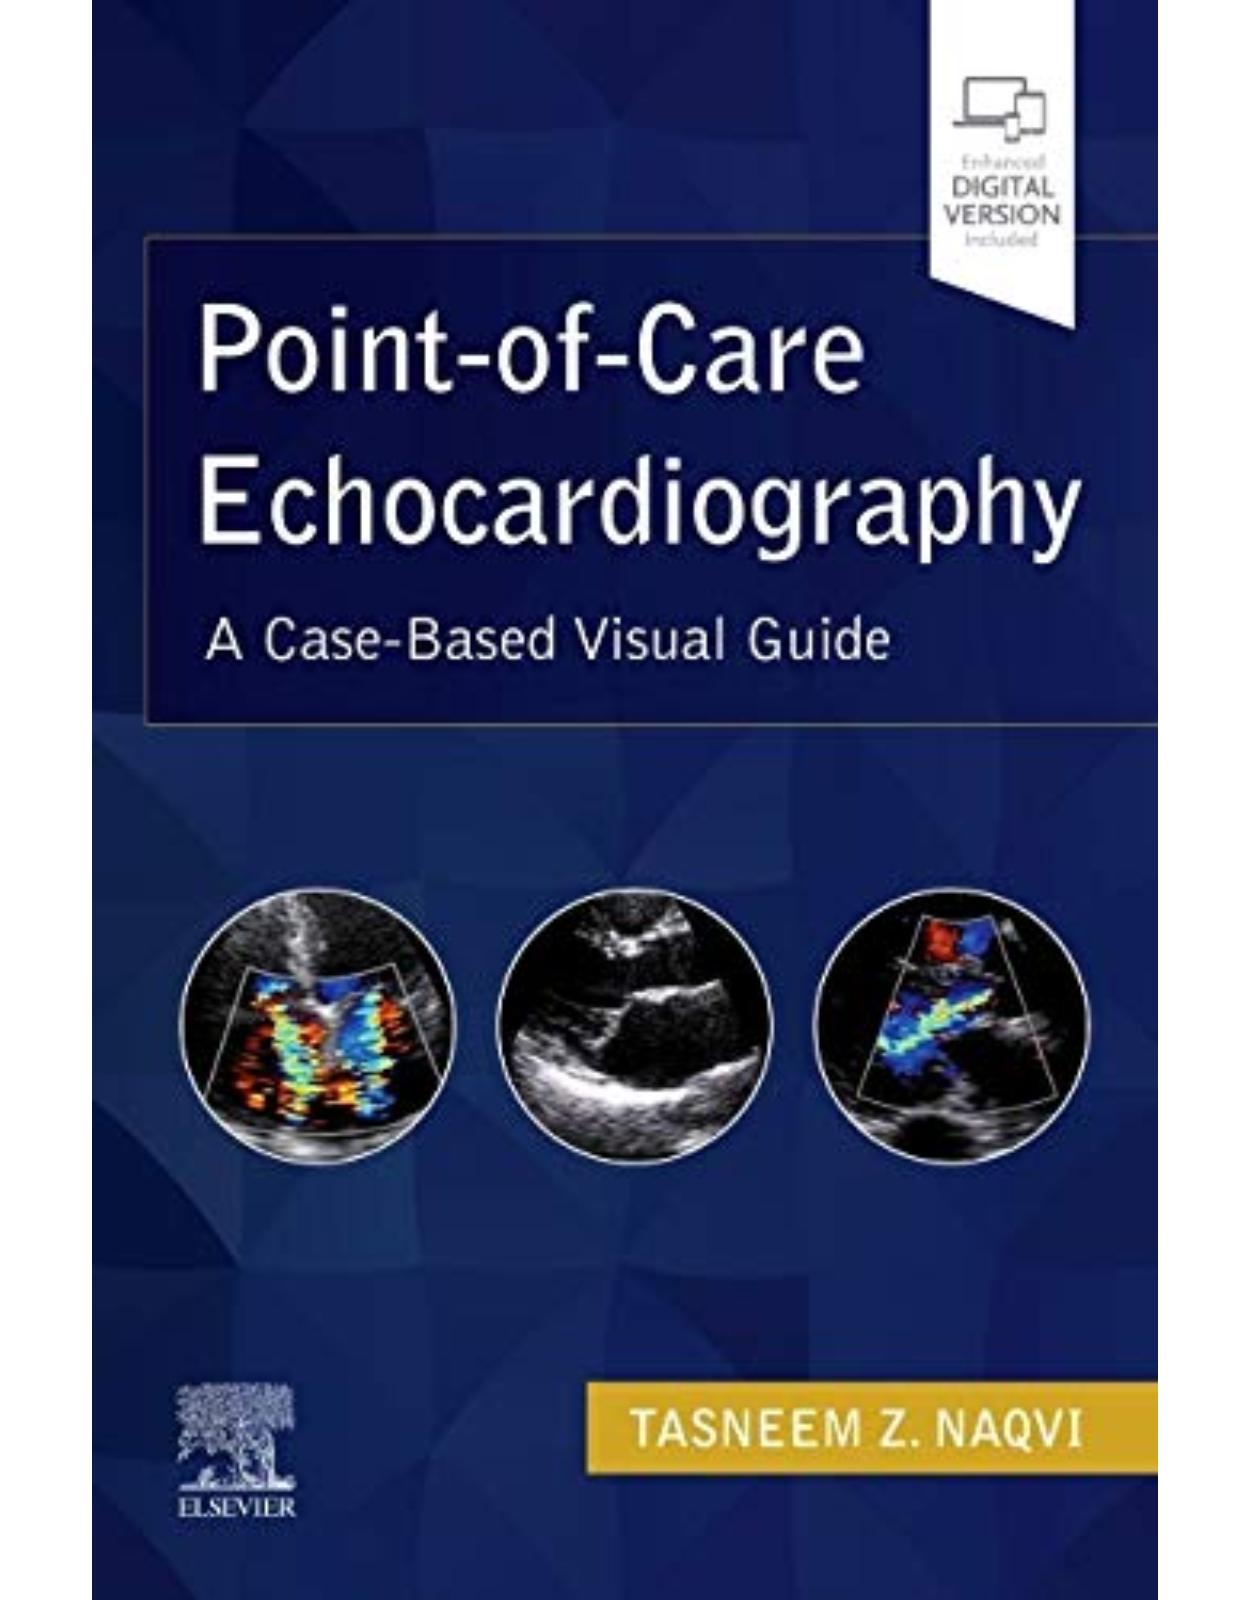 Point-of-Care Echocardiography: A Clinical Case-Based Visual Guide 